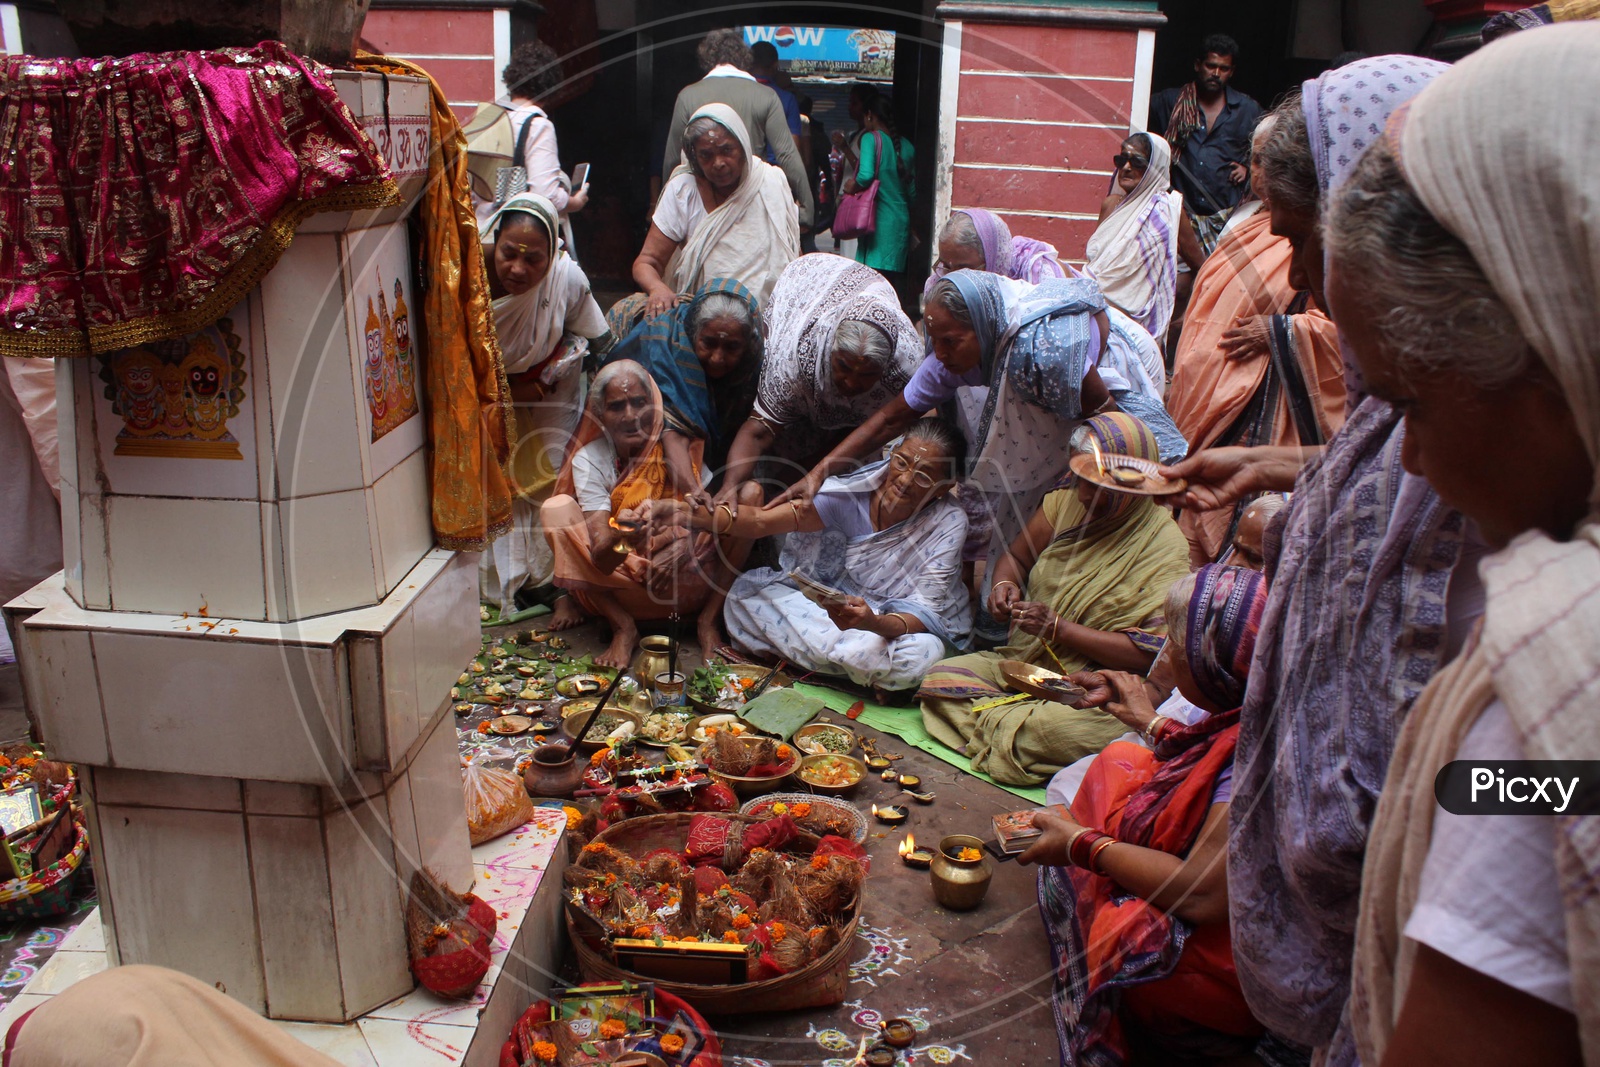 Hindu Widows are worshiping Tulsi Devi, a goodess, worships in the form of plant.